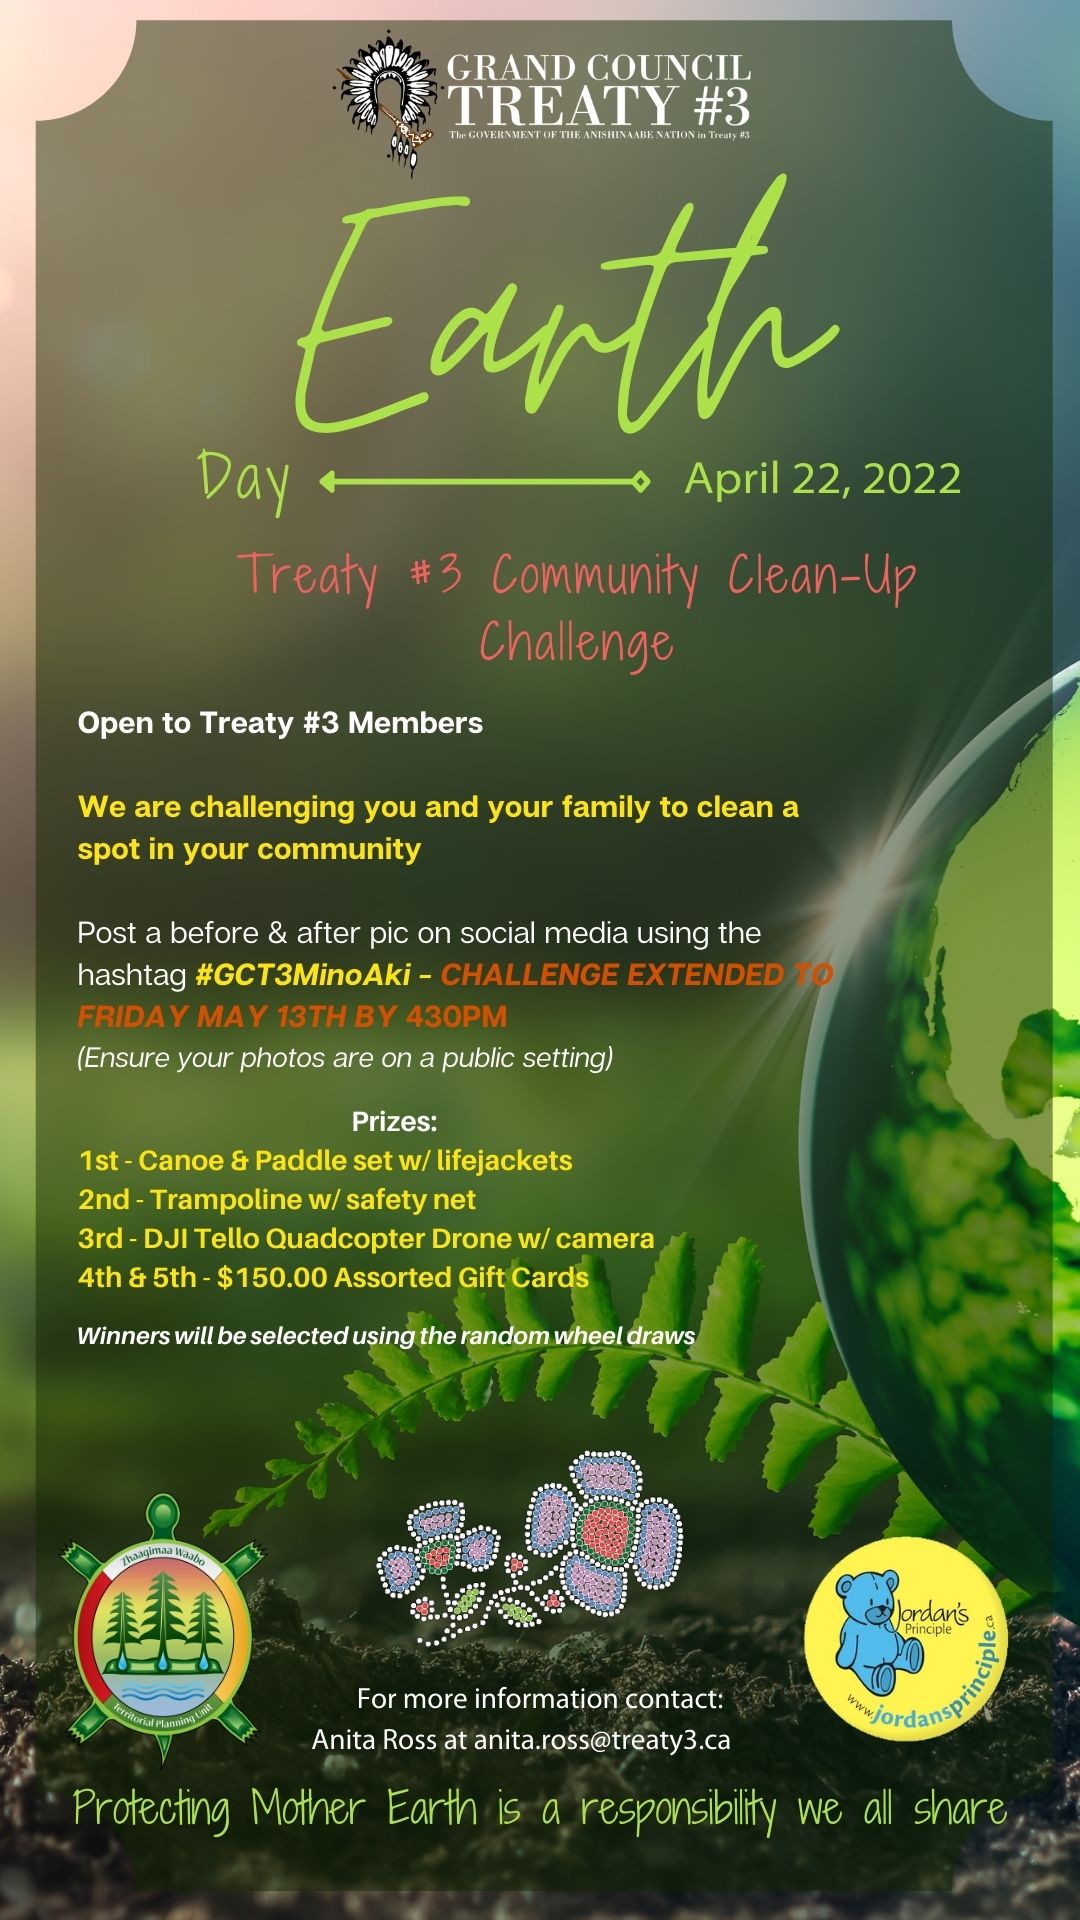 Earth Day - Treaty #3 Community Clean-Up Challenge (DEADLINE EXTENDED!)